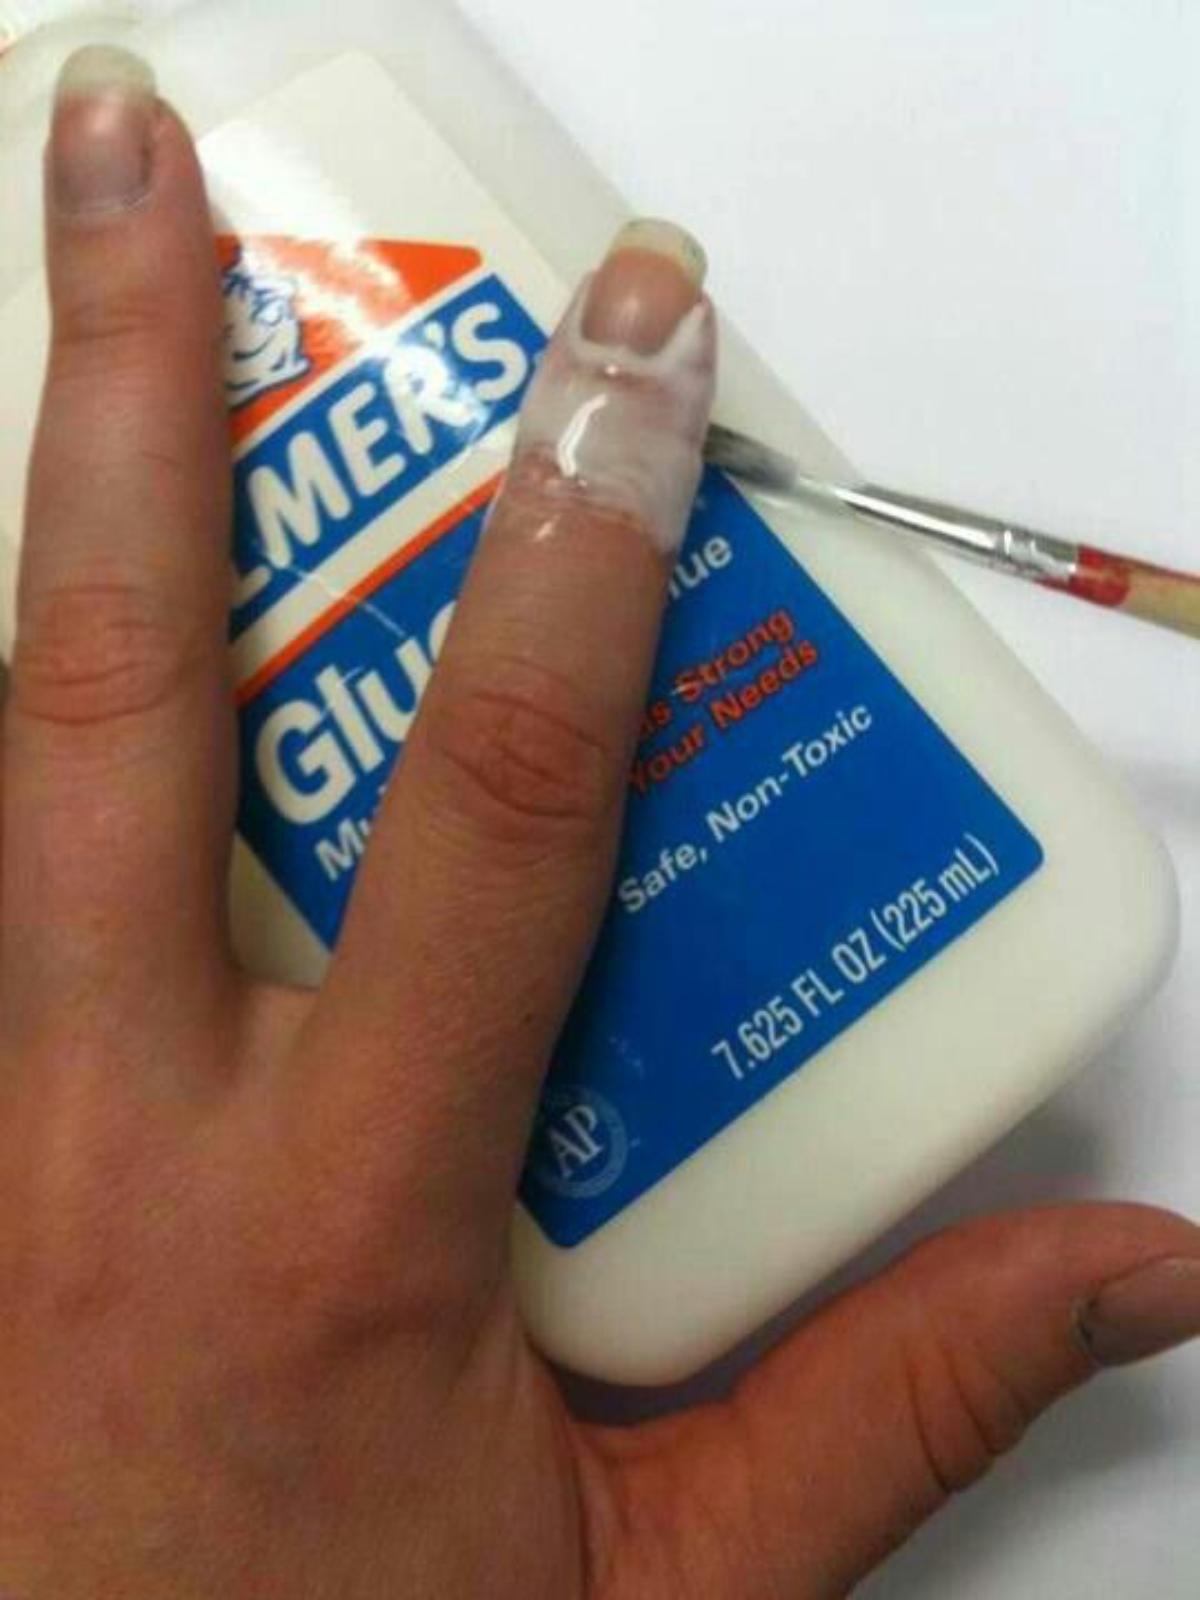 Elmer’s Glue for the Perfect Manicure